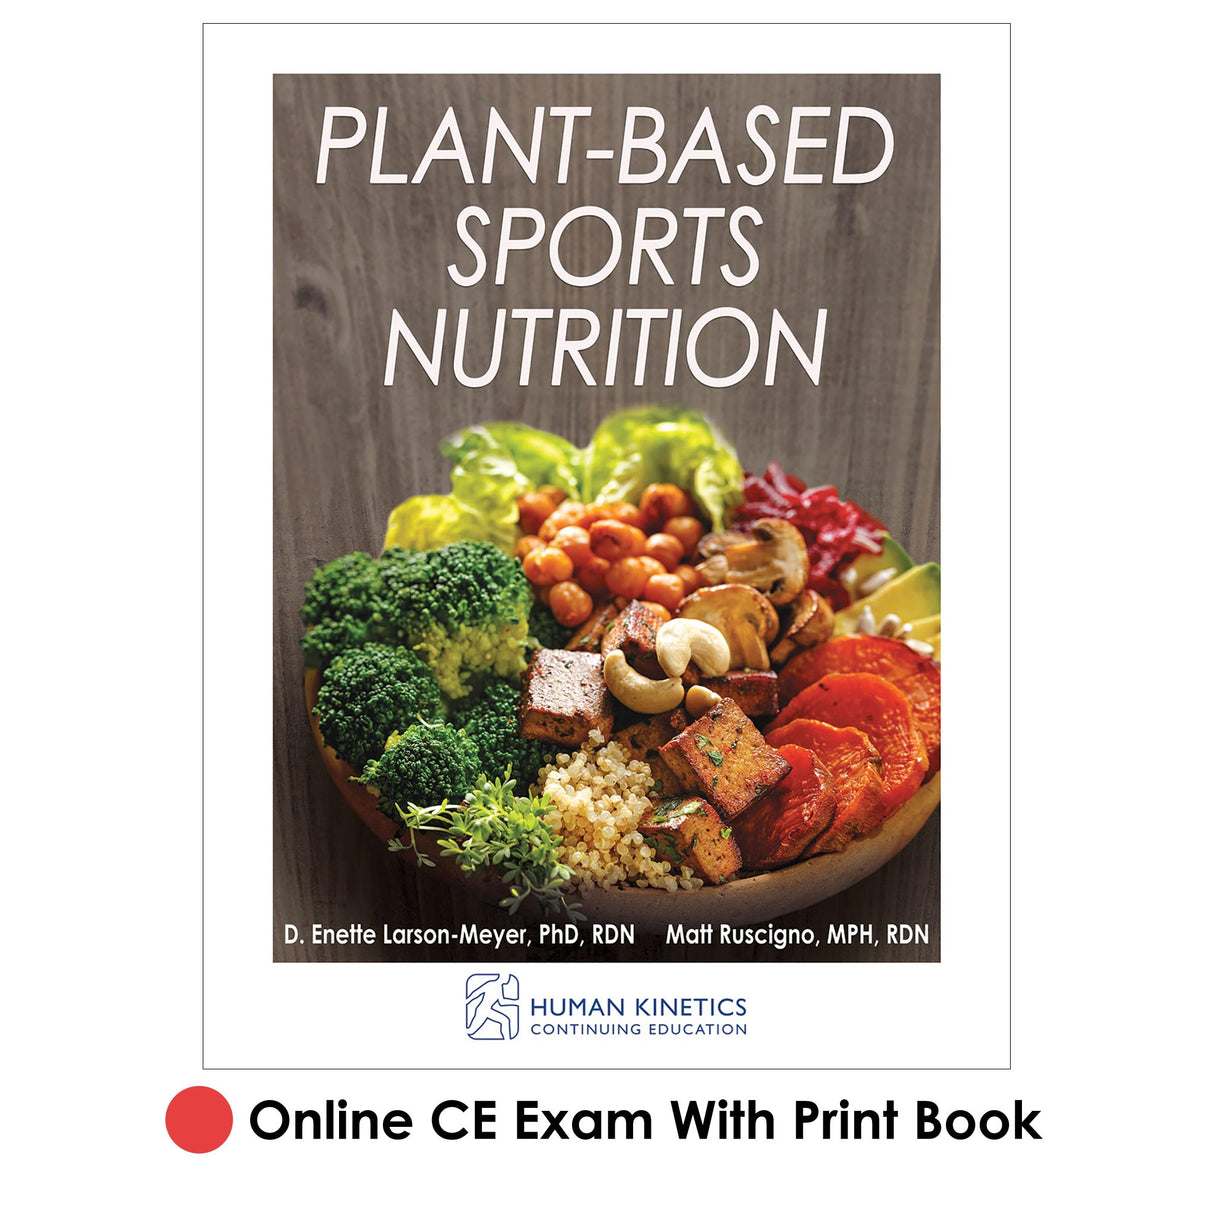 Plant-Based Sports Nutrition Online CE Exam With Print Book